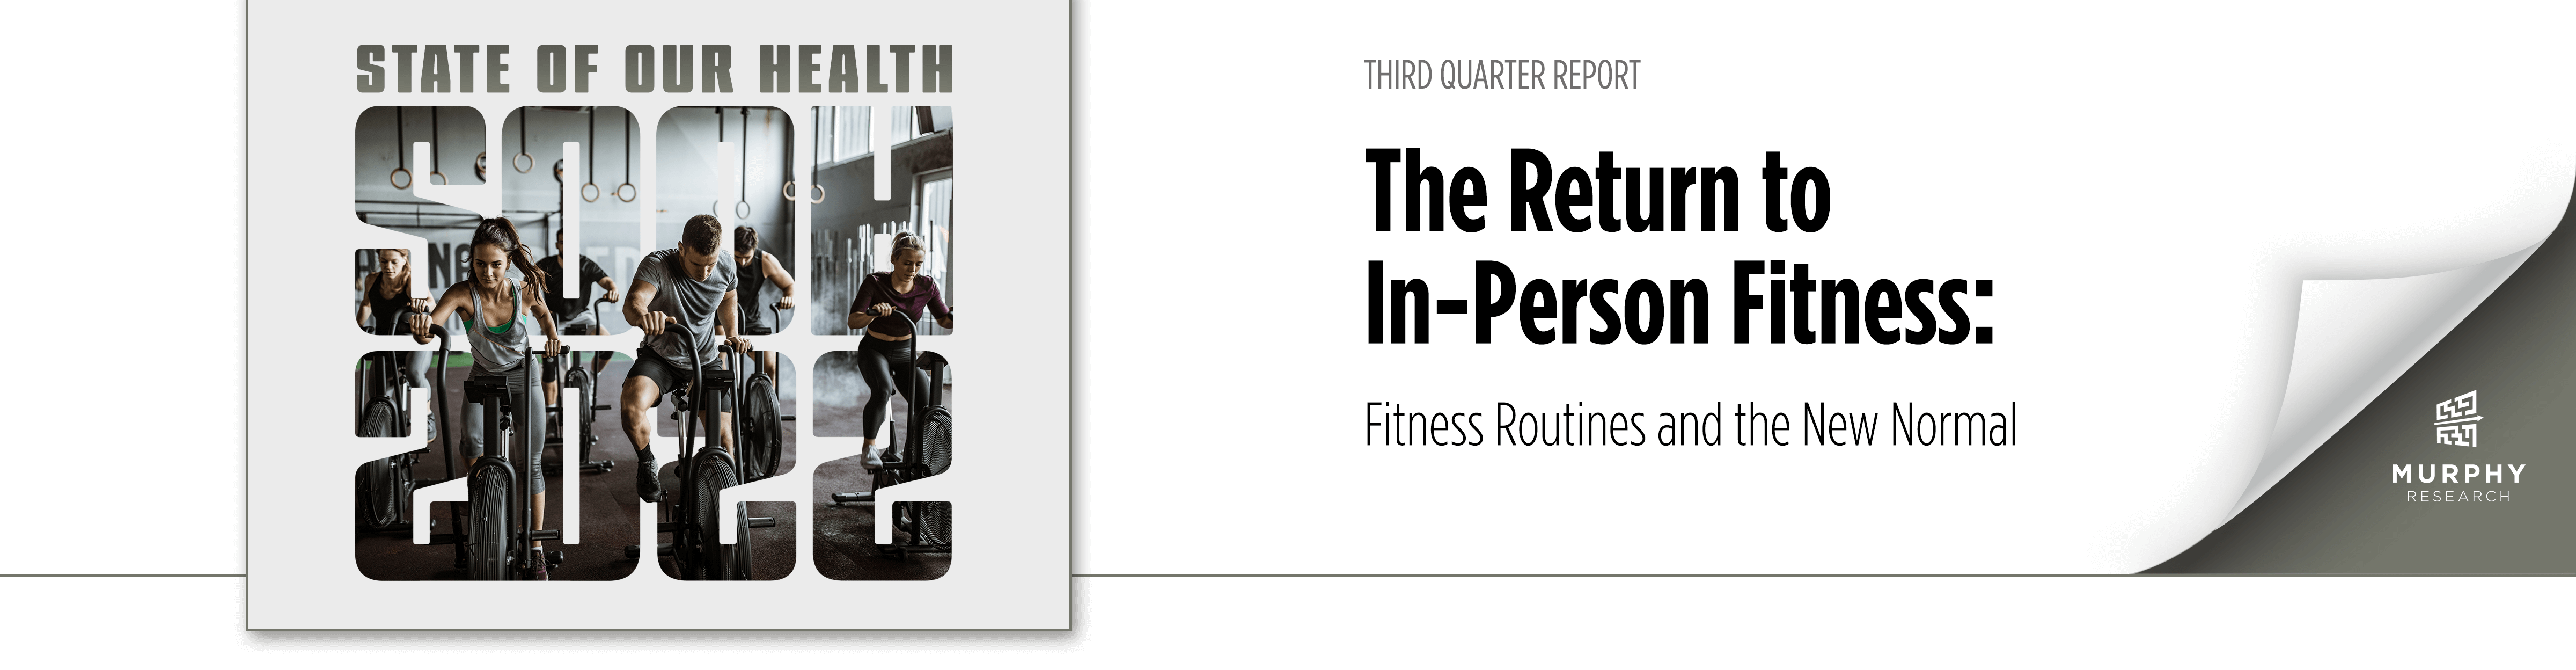 The Return to In-Person Fitness: Fitness Routines and the New Normal